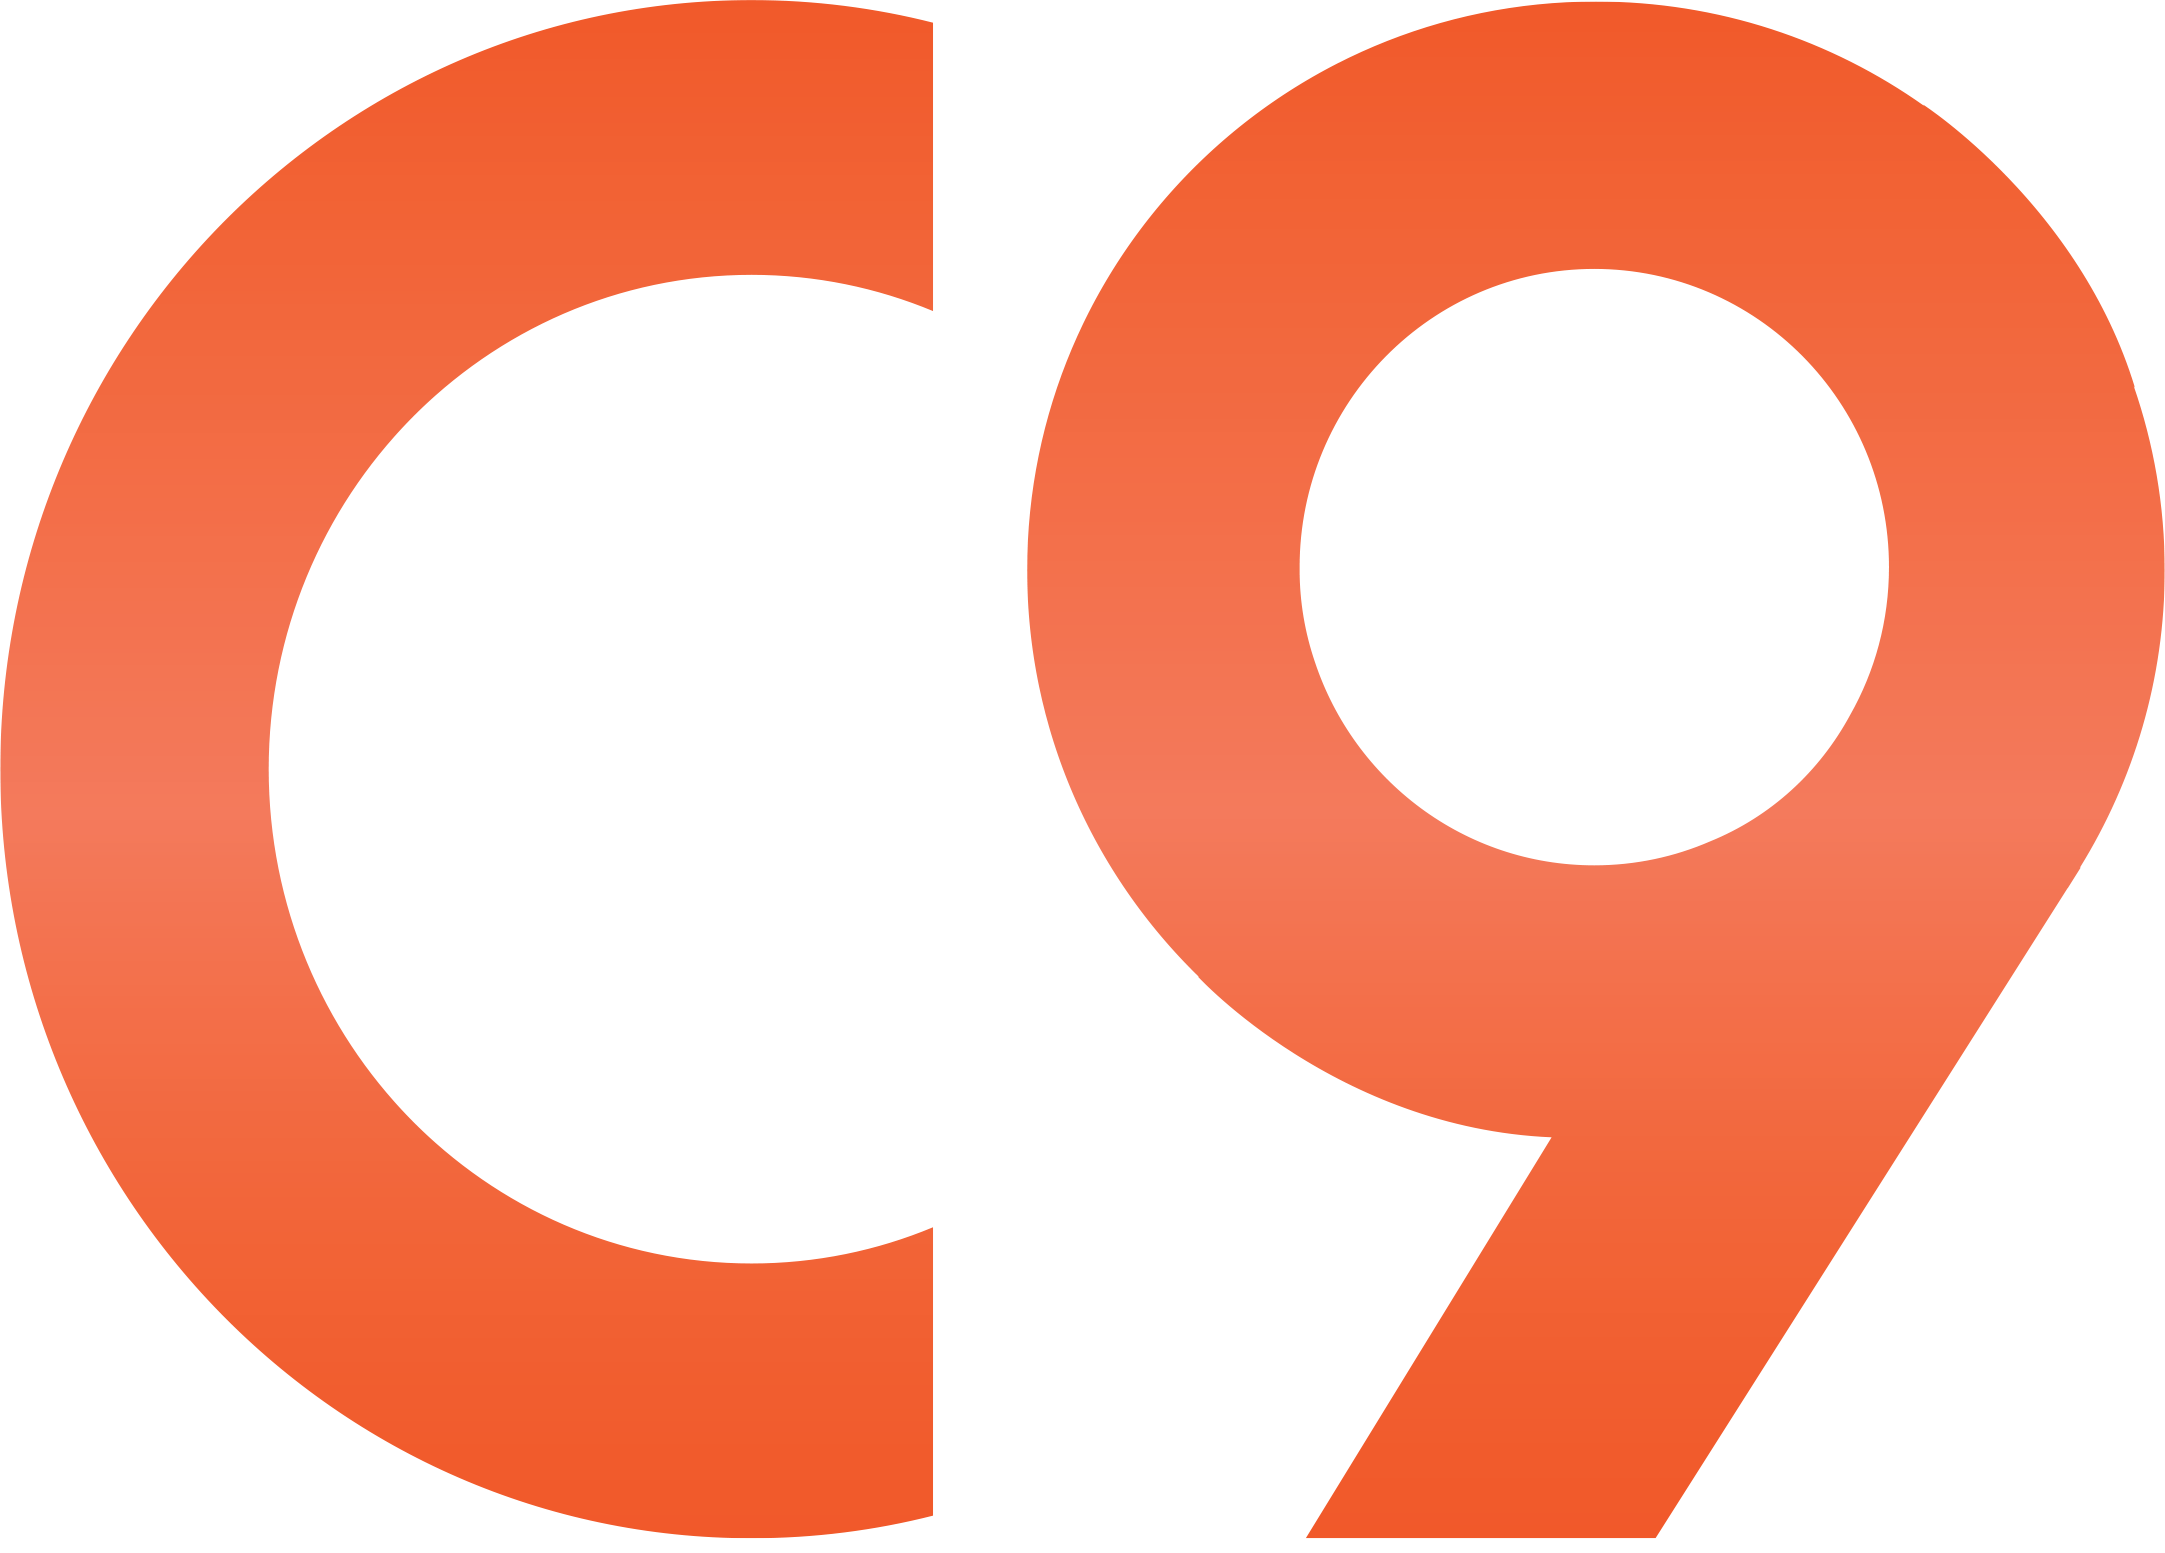 c9 rolls out first store in mumbai, plans for 100 more by 2020